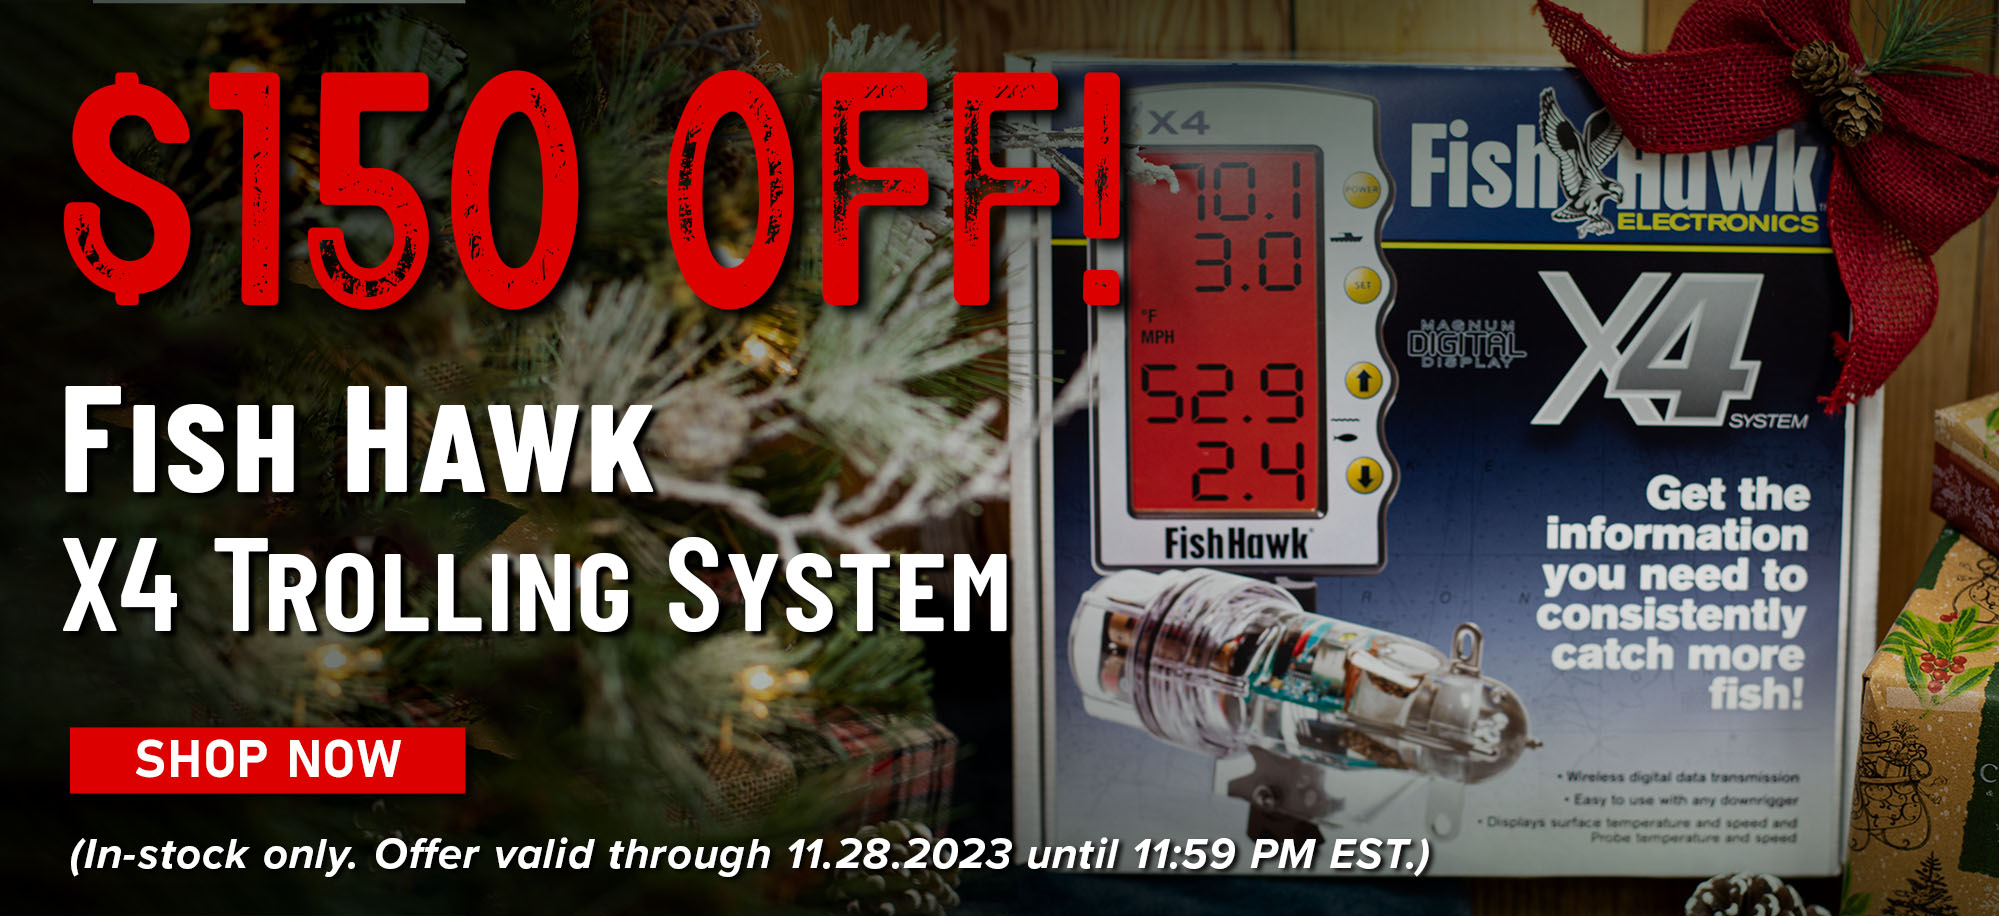 $150 Off! Fish Hawk X4 Trolling System Shop Now (In-stock only. Offer valid through 11.28.2023 until 11:59 PM EST.)